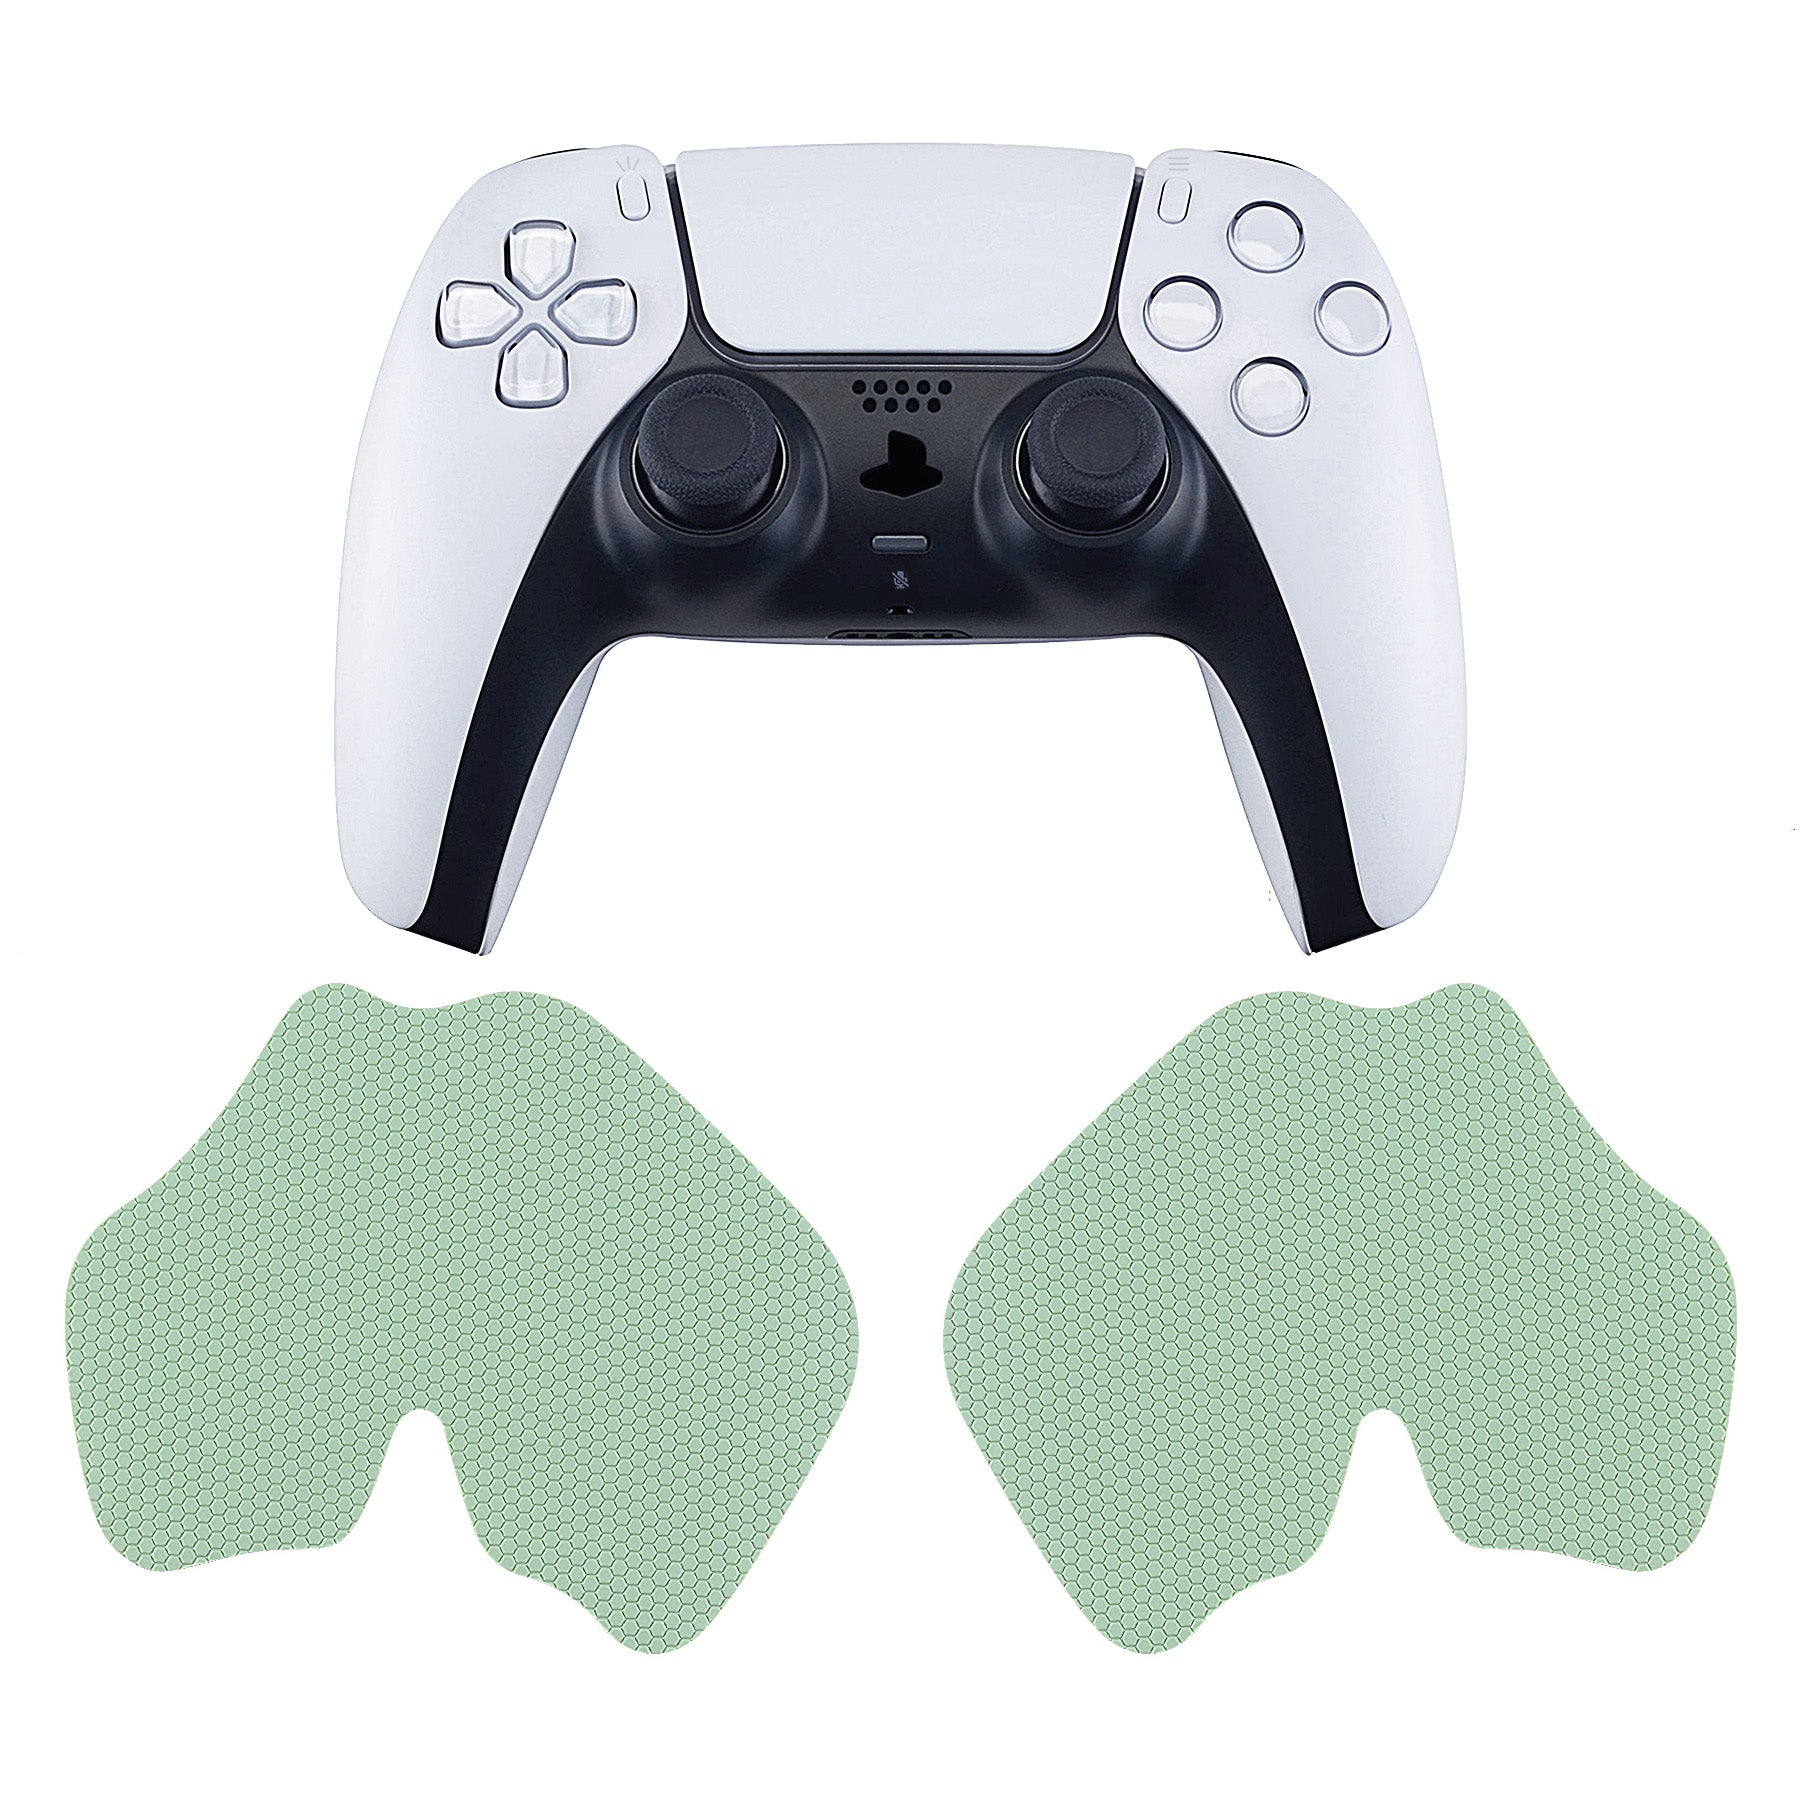 PlayVital Matcha Green Anti-Skid Sweat-Absorbent Controller Grip for PlayStation 5 Controller, Professional Textured Soft Rubber Pads Handle Grips for PS5 Controller - PFPJ025 PlayVital